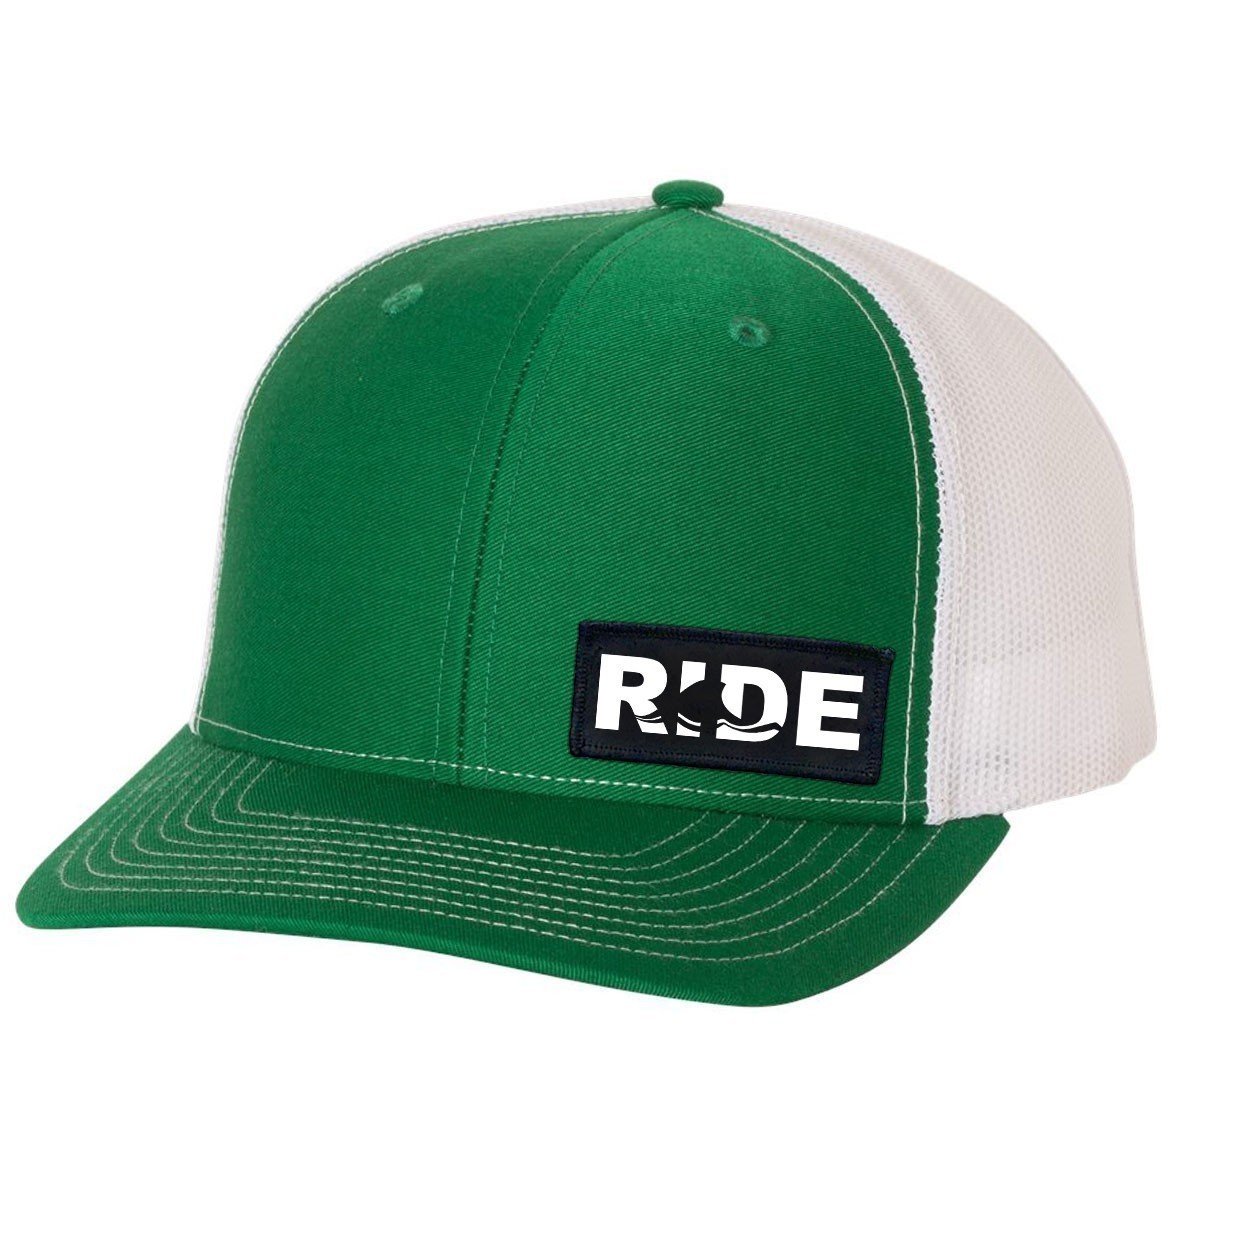 Ride Wave Logo Night Out Woven Patch Snapback Trucker Hat Green/White (White Logo)